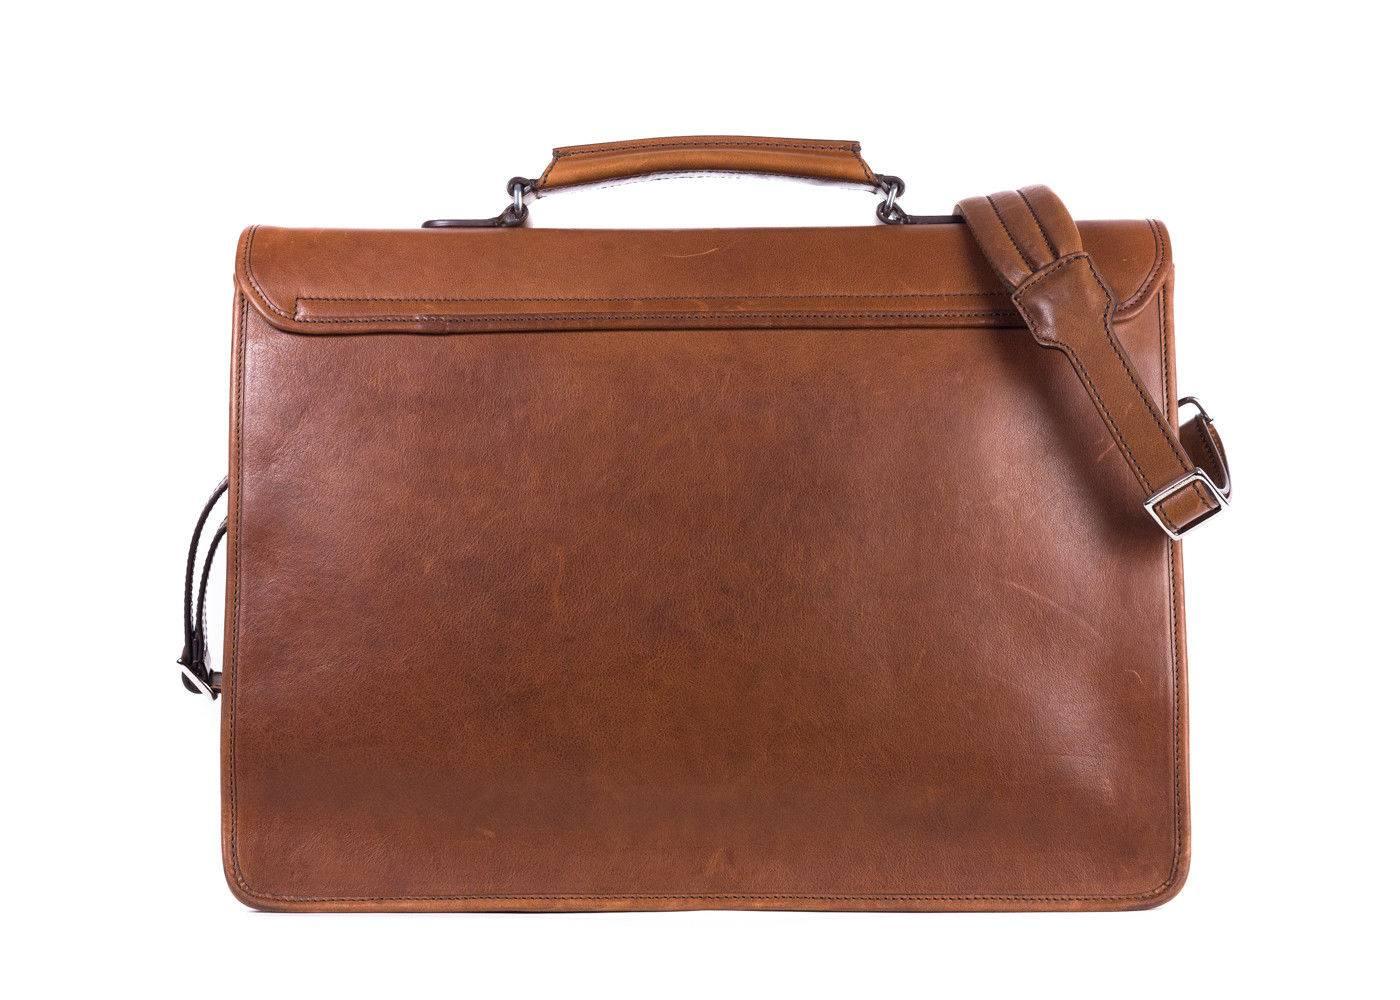 Brunello Cucinelli Men's Brown Leather Messenger Bag In New Condition For Sale In Brooklyn, NY